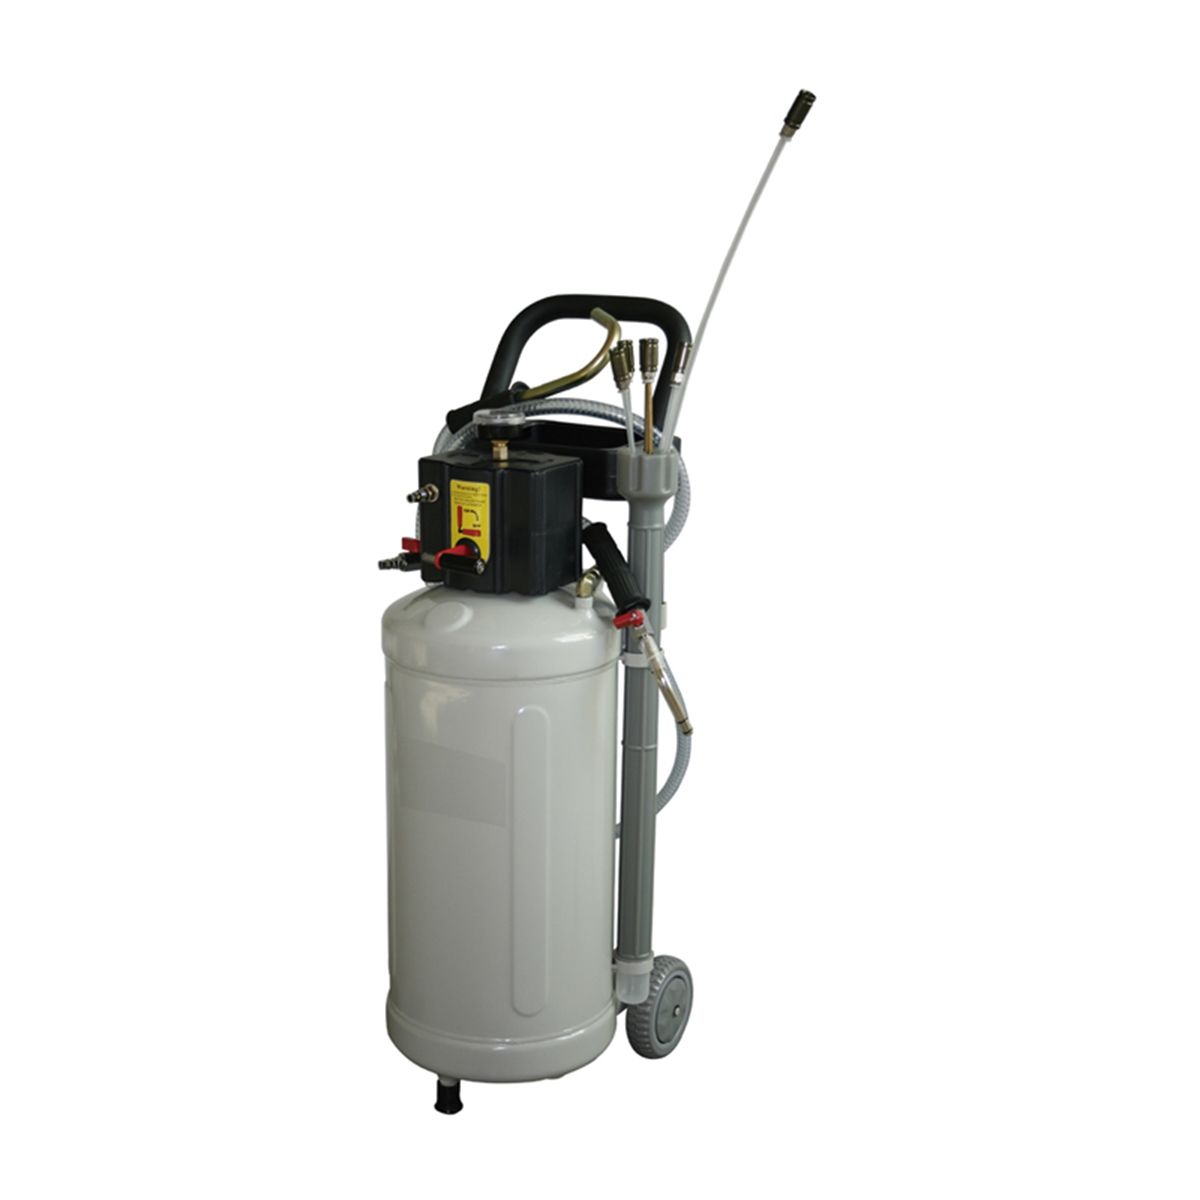 z-nla Air Operated Waste Oil Drainer - 8 Gallon